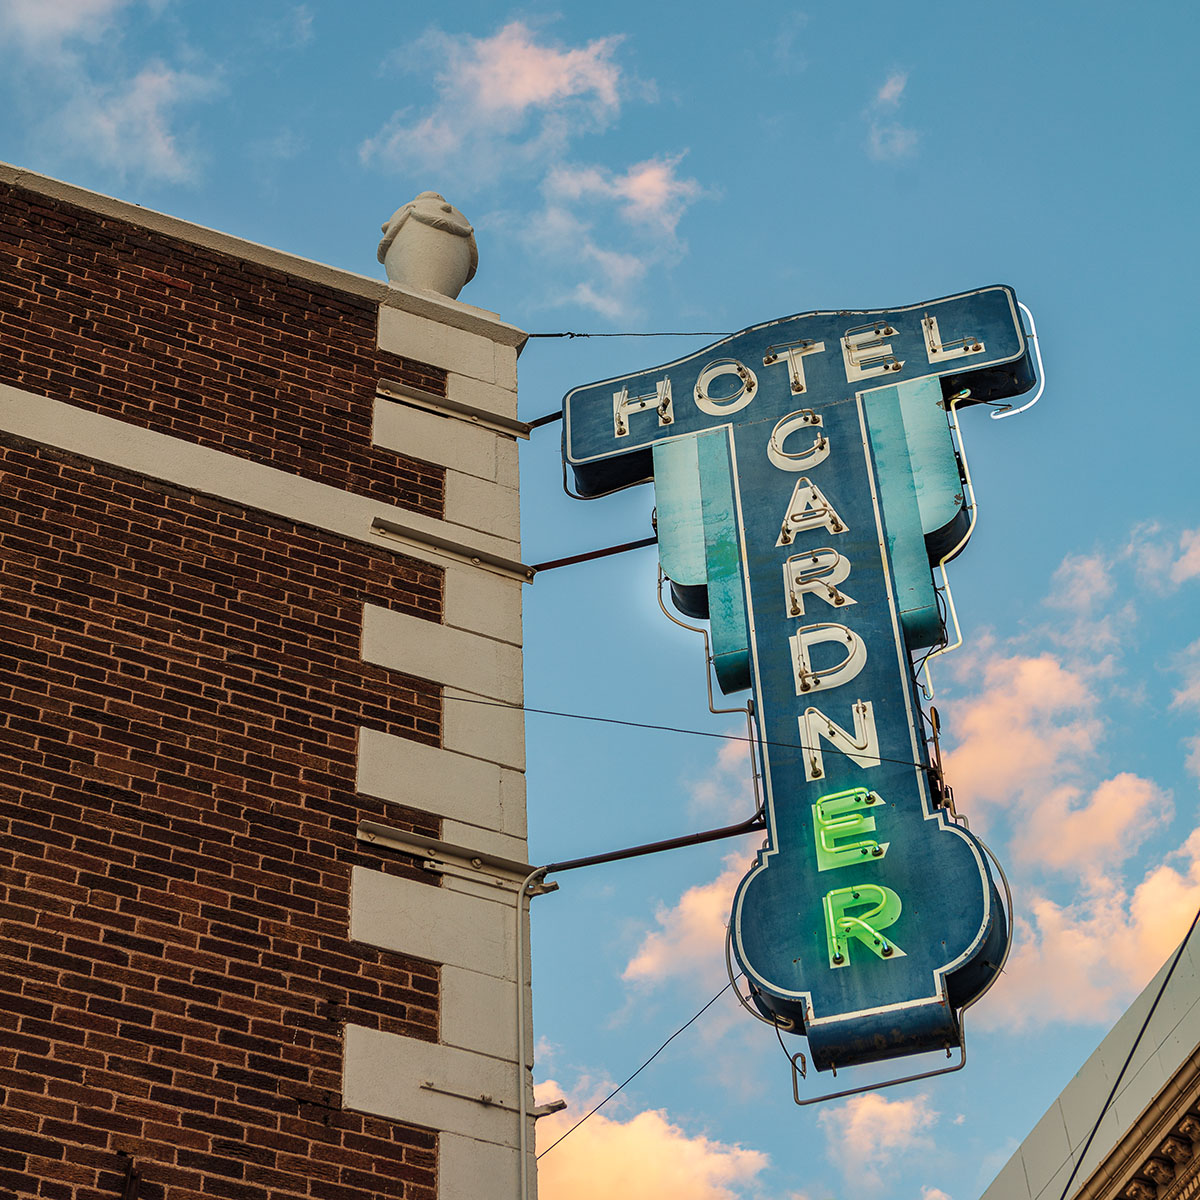 A green-blue sign reading "Hotel Gardner" is partially illuminated in front of a blue sky with a few clouds